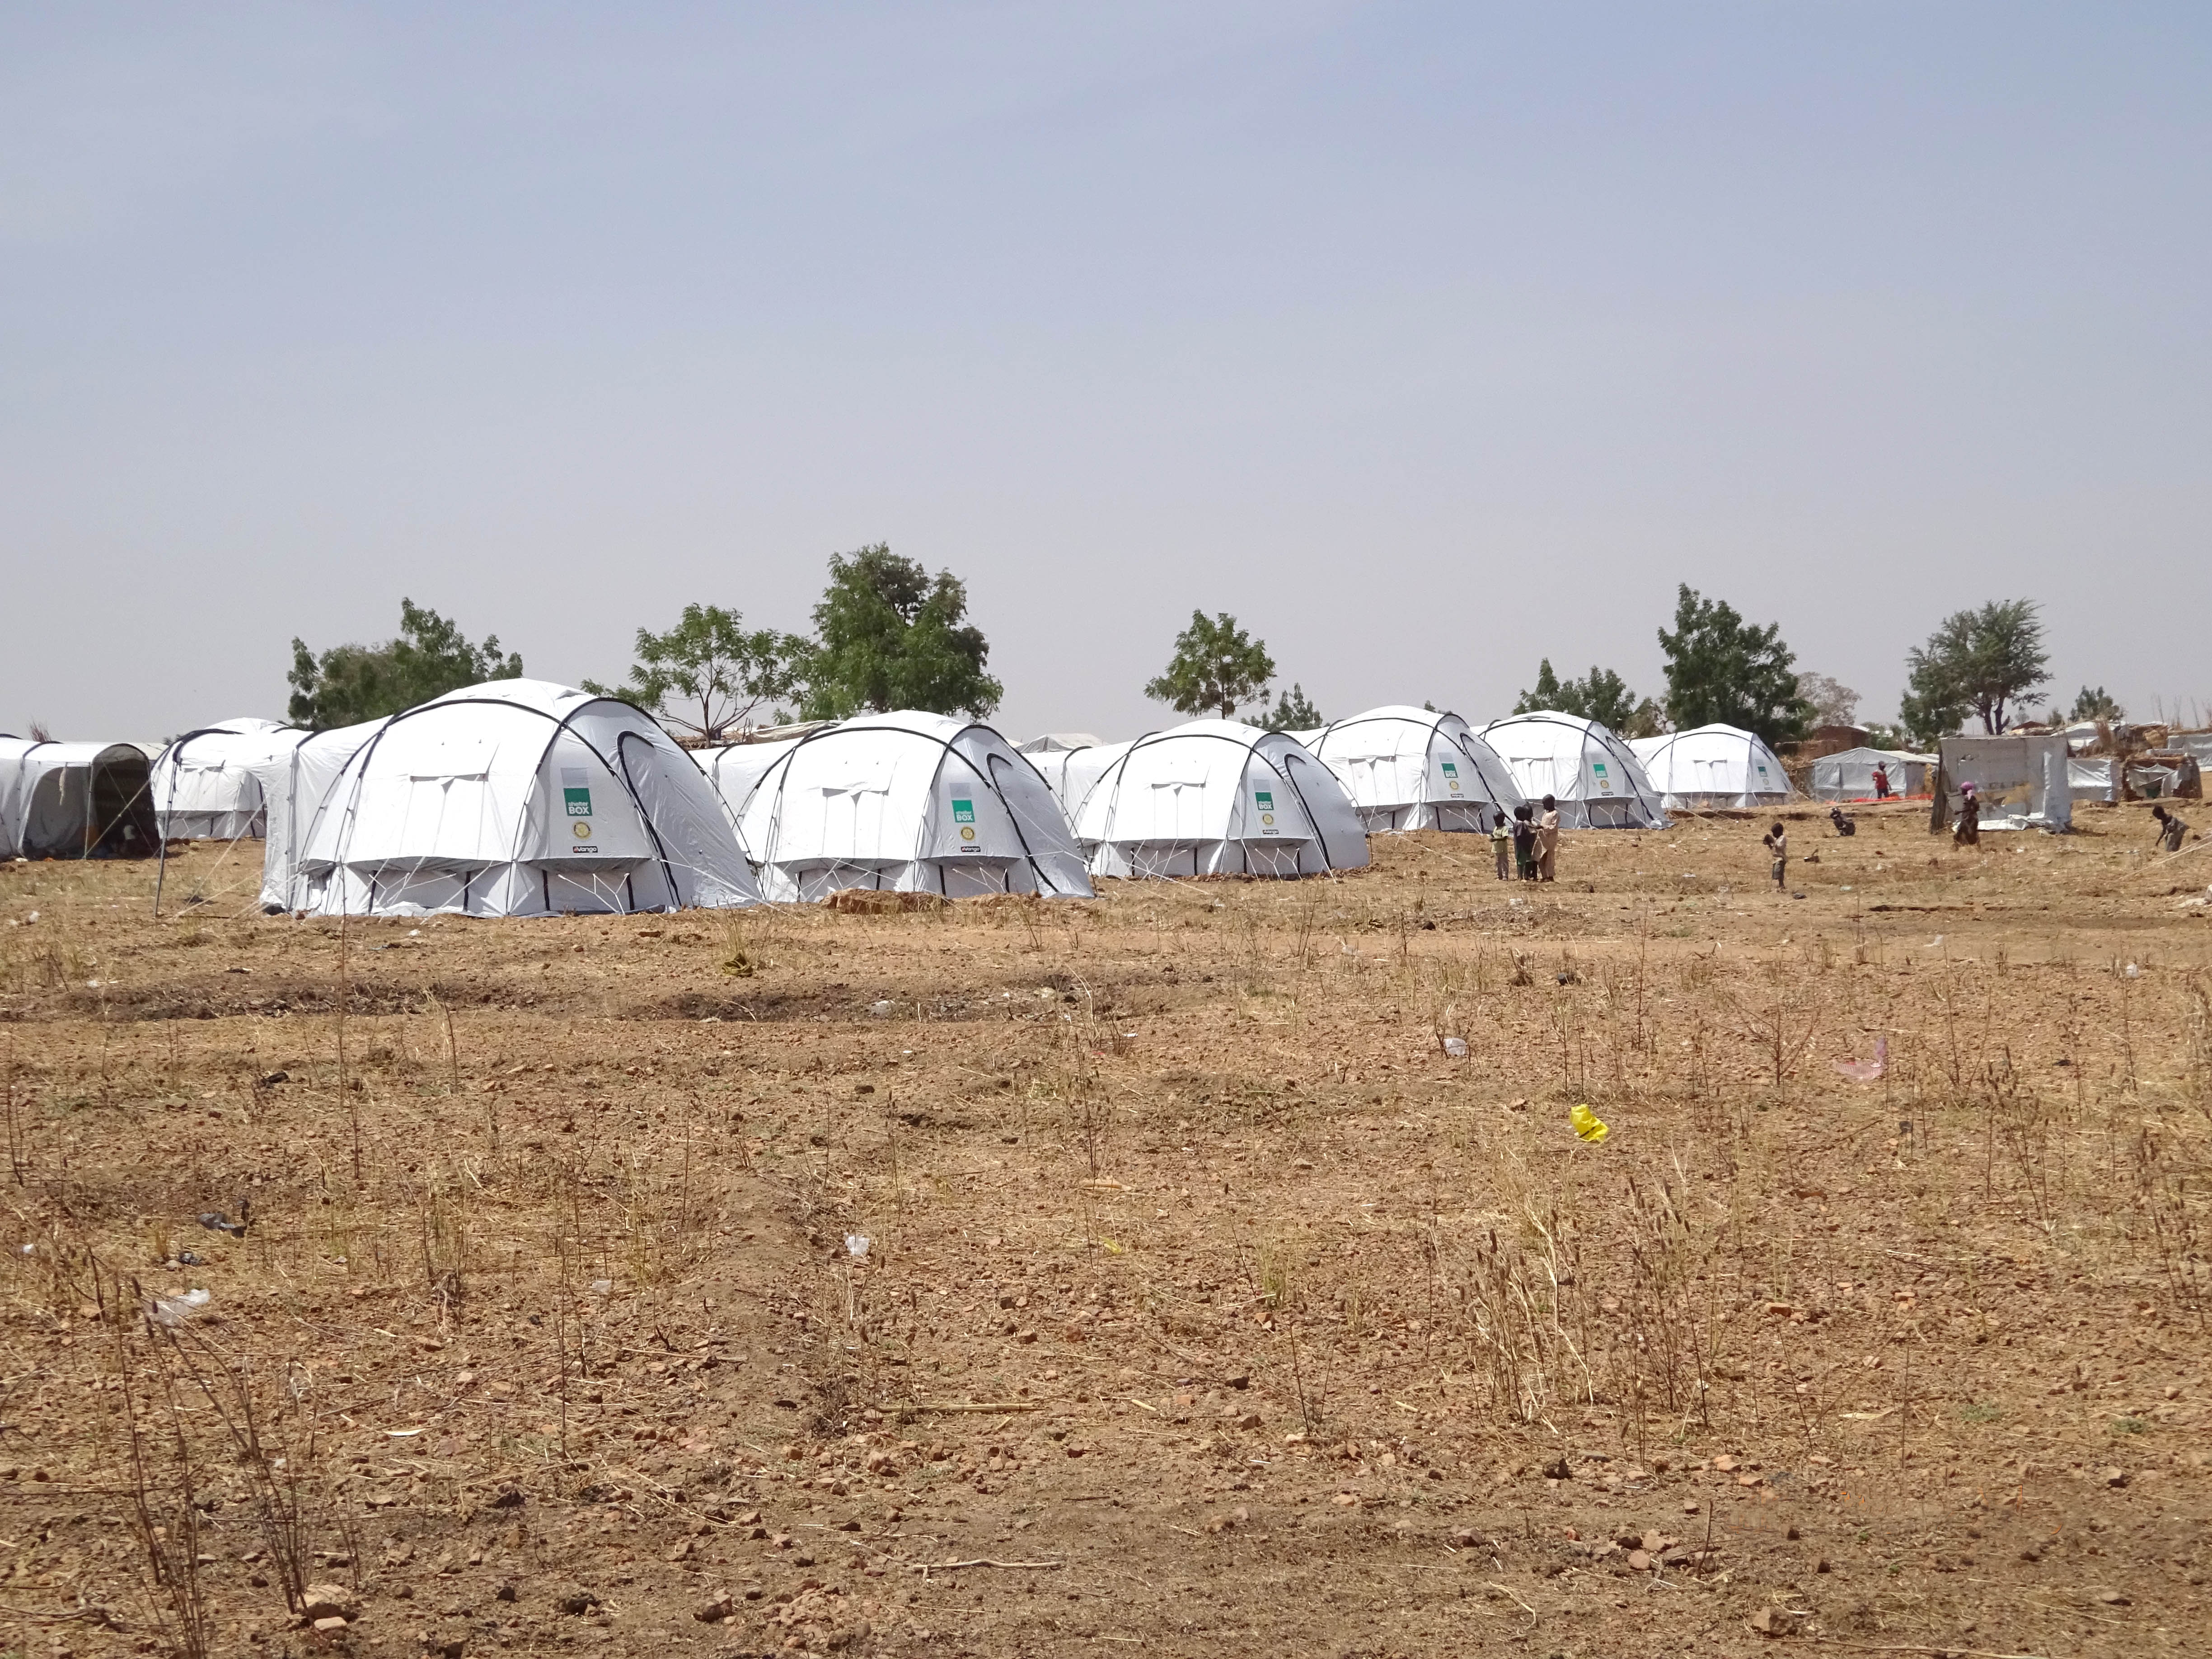 Tents lined up in Cameroon